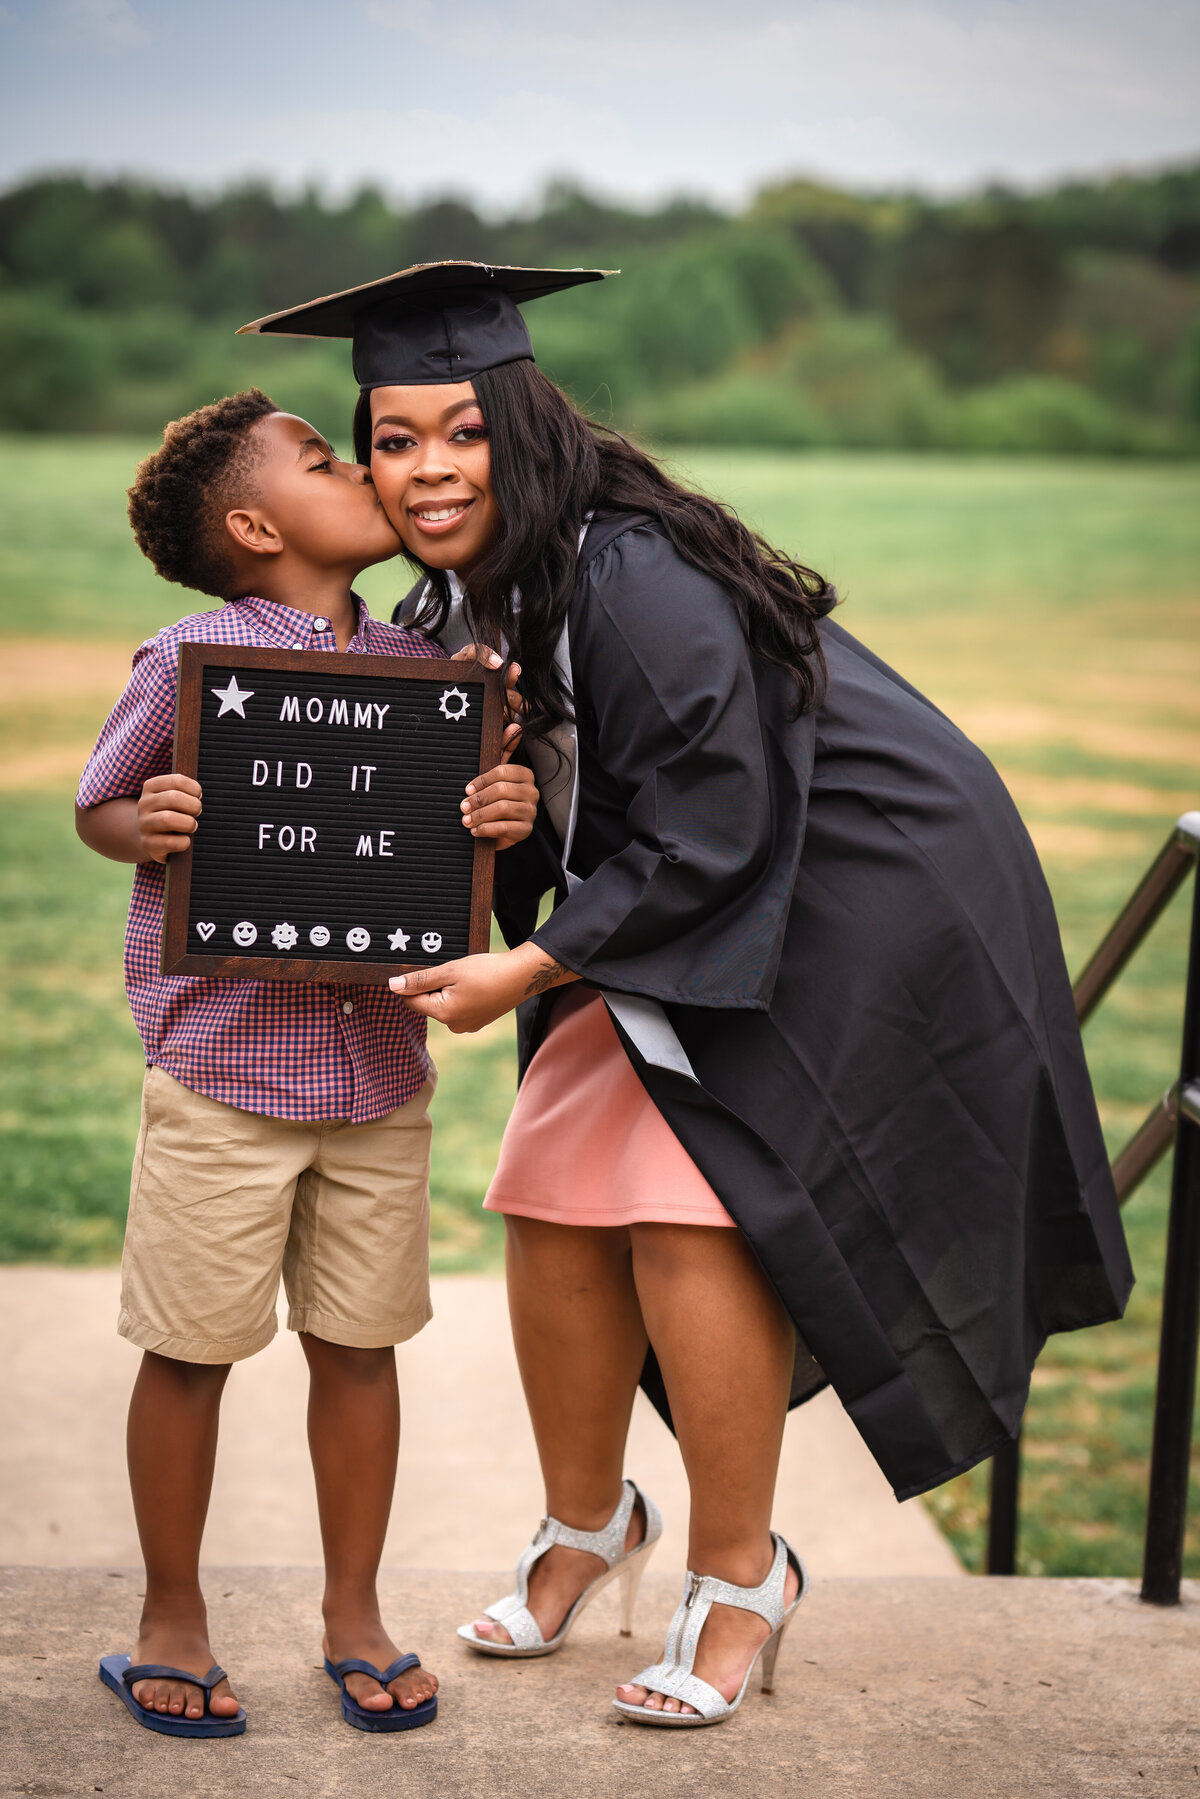 A mom in a graduation cap is doing a photoshoot with her young son and he is kissing her on the cheek.